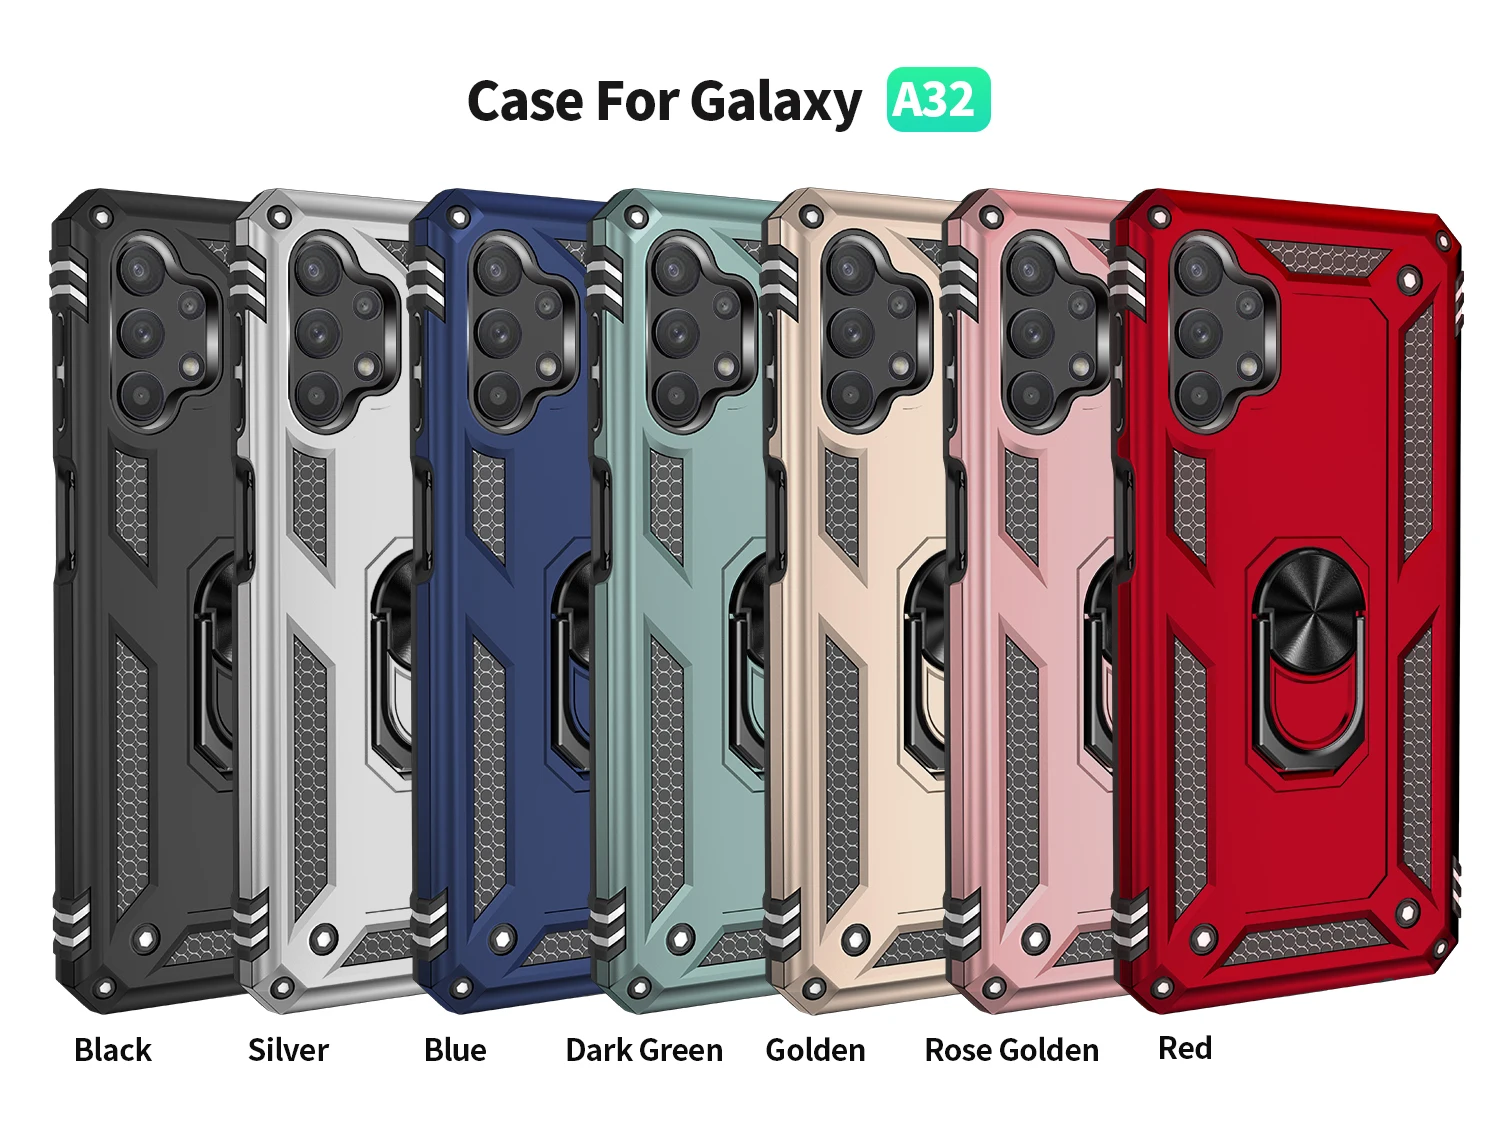 

Cases for Samsung Galaxy A32 A12 A42 5G S21 A52 A72 New Kickstand Hybrid Shockproof Case Skin Cover Phone Back Case Shell